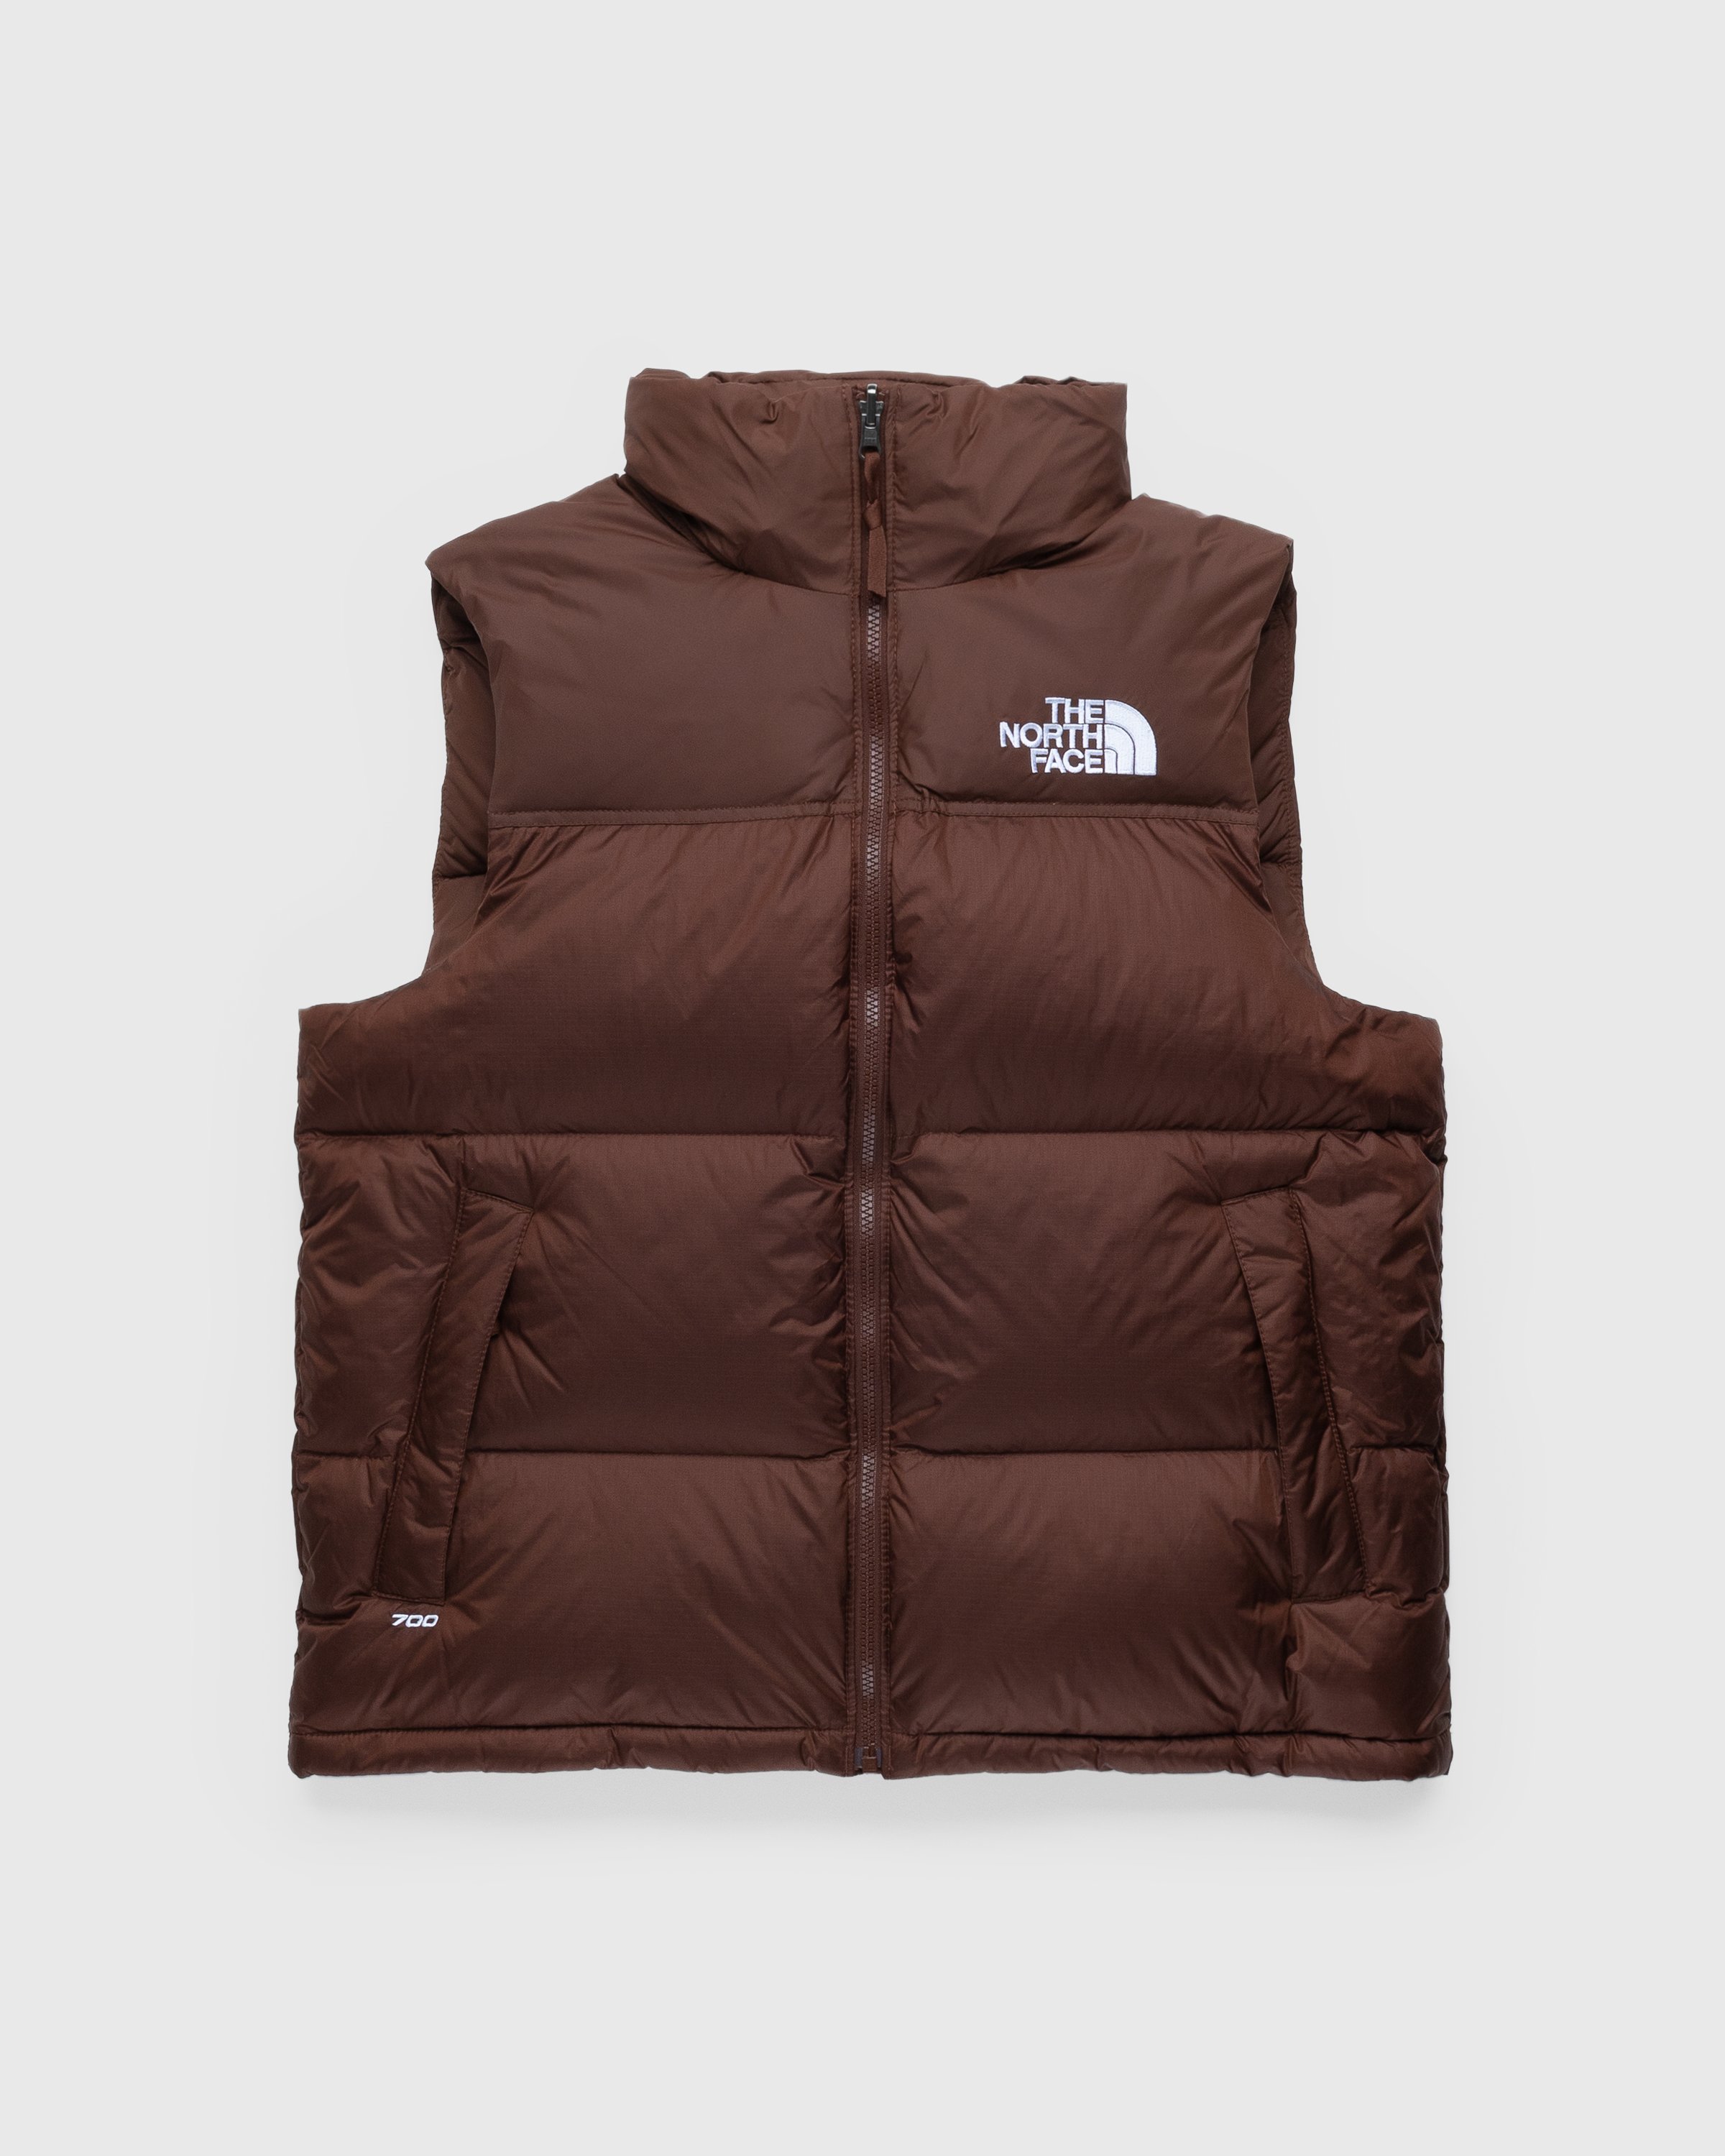 The North Face - Insulated Himalayan Vest Dark Oak - Clothing - Beige - Image 1